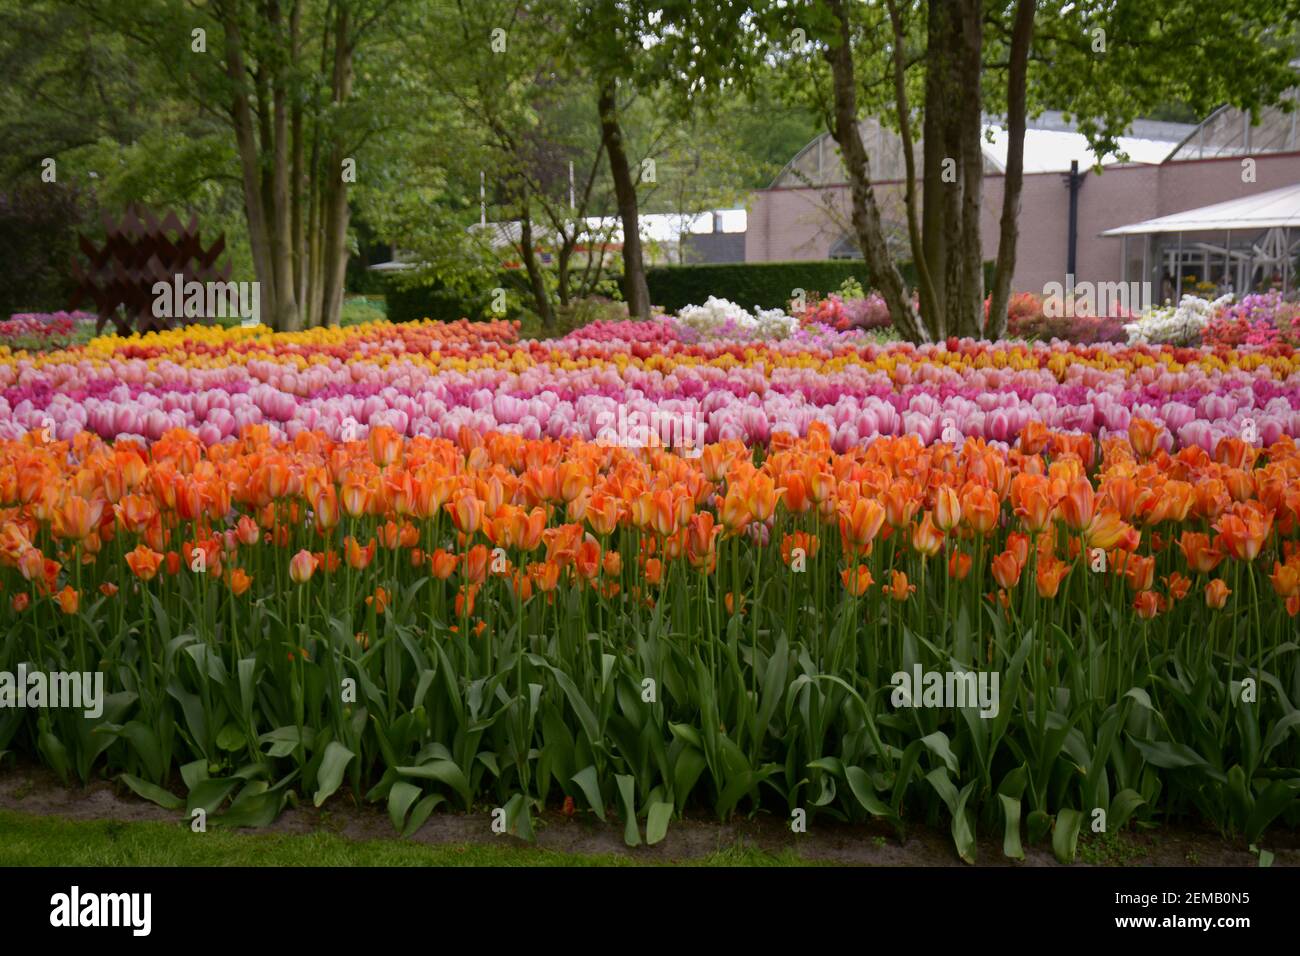 Rows of beautiful and multi colored tulips in the tulips fields in Amsterdam, Netherlands. Stock Photo